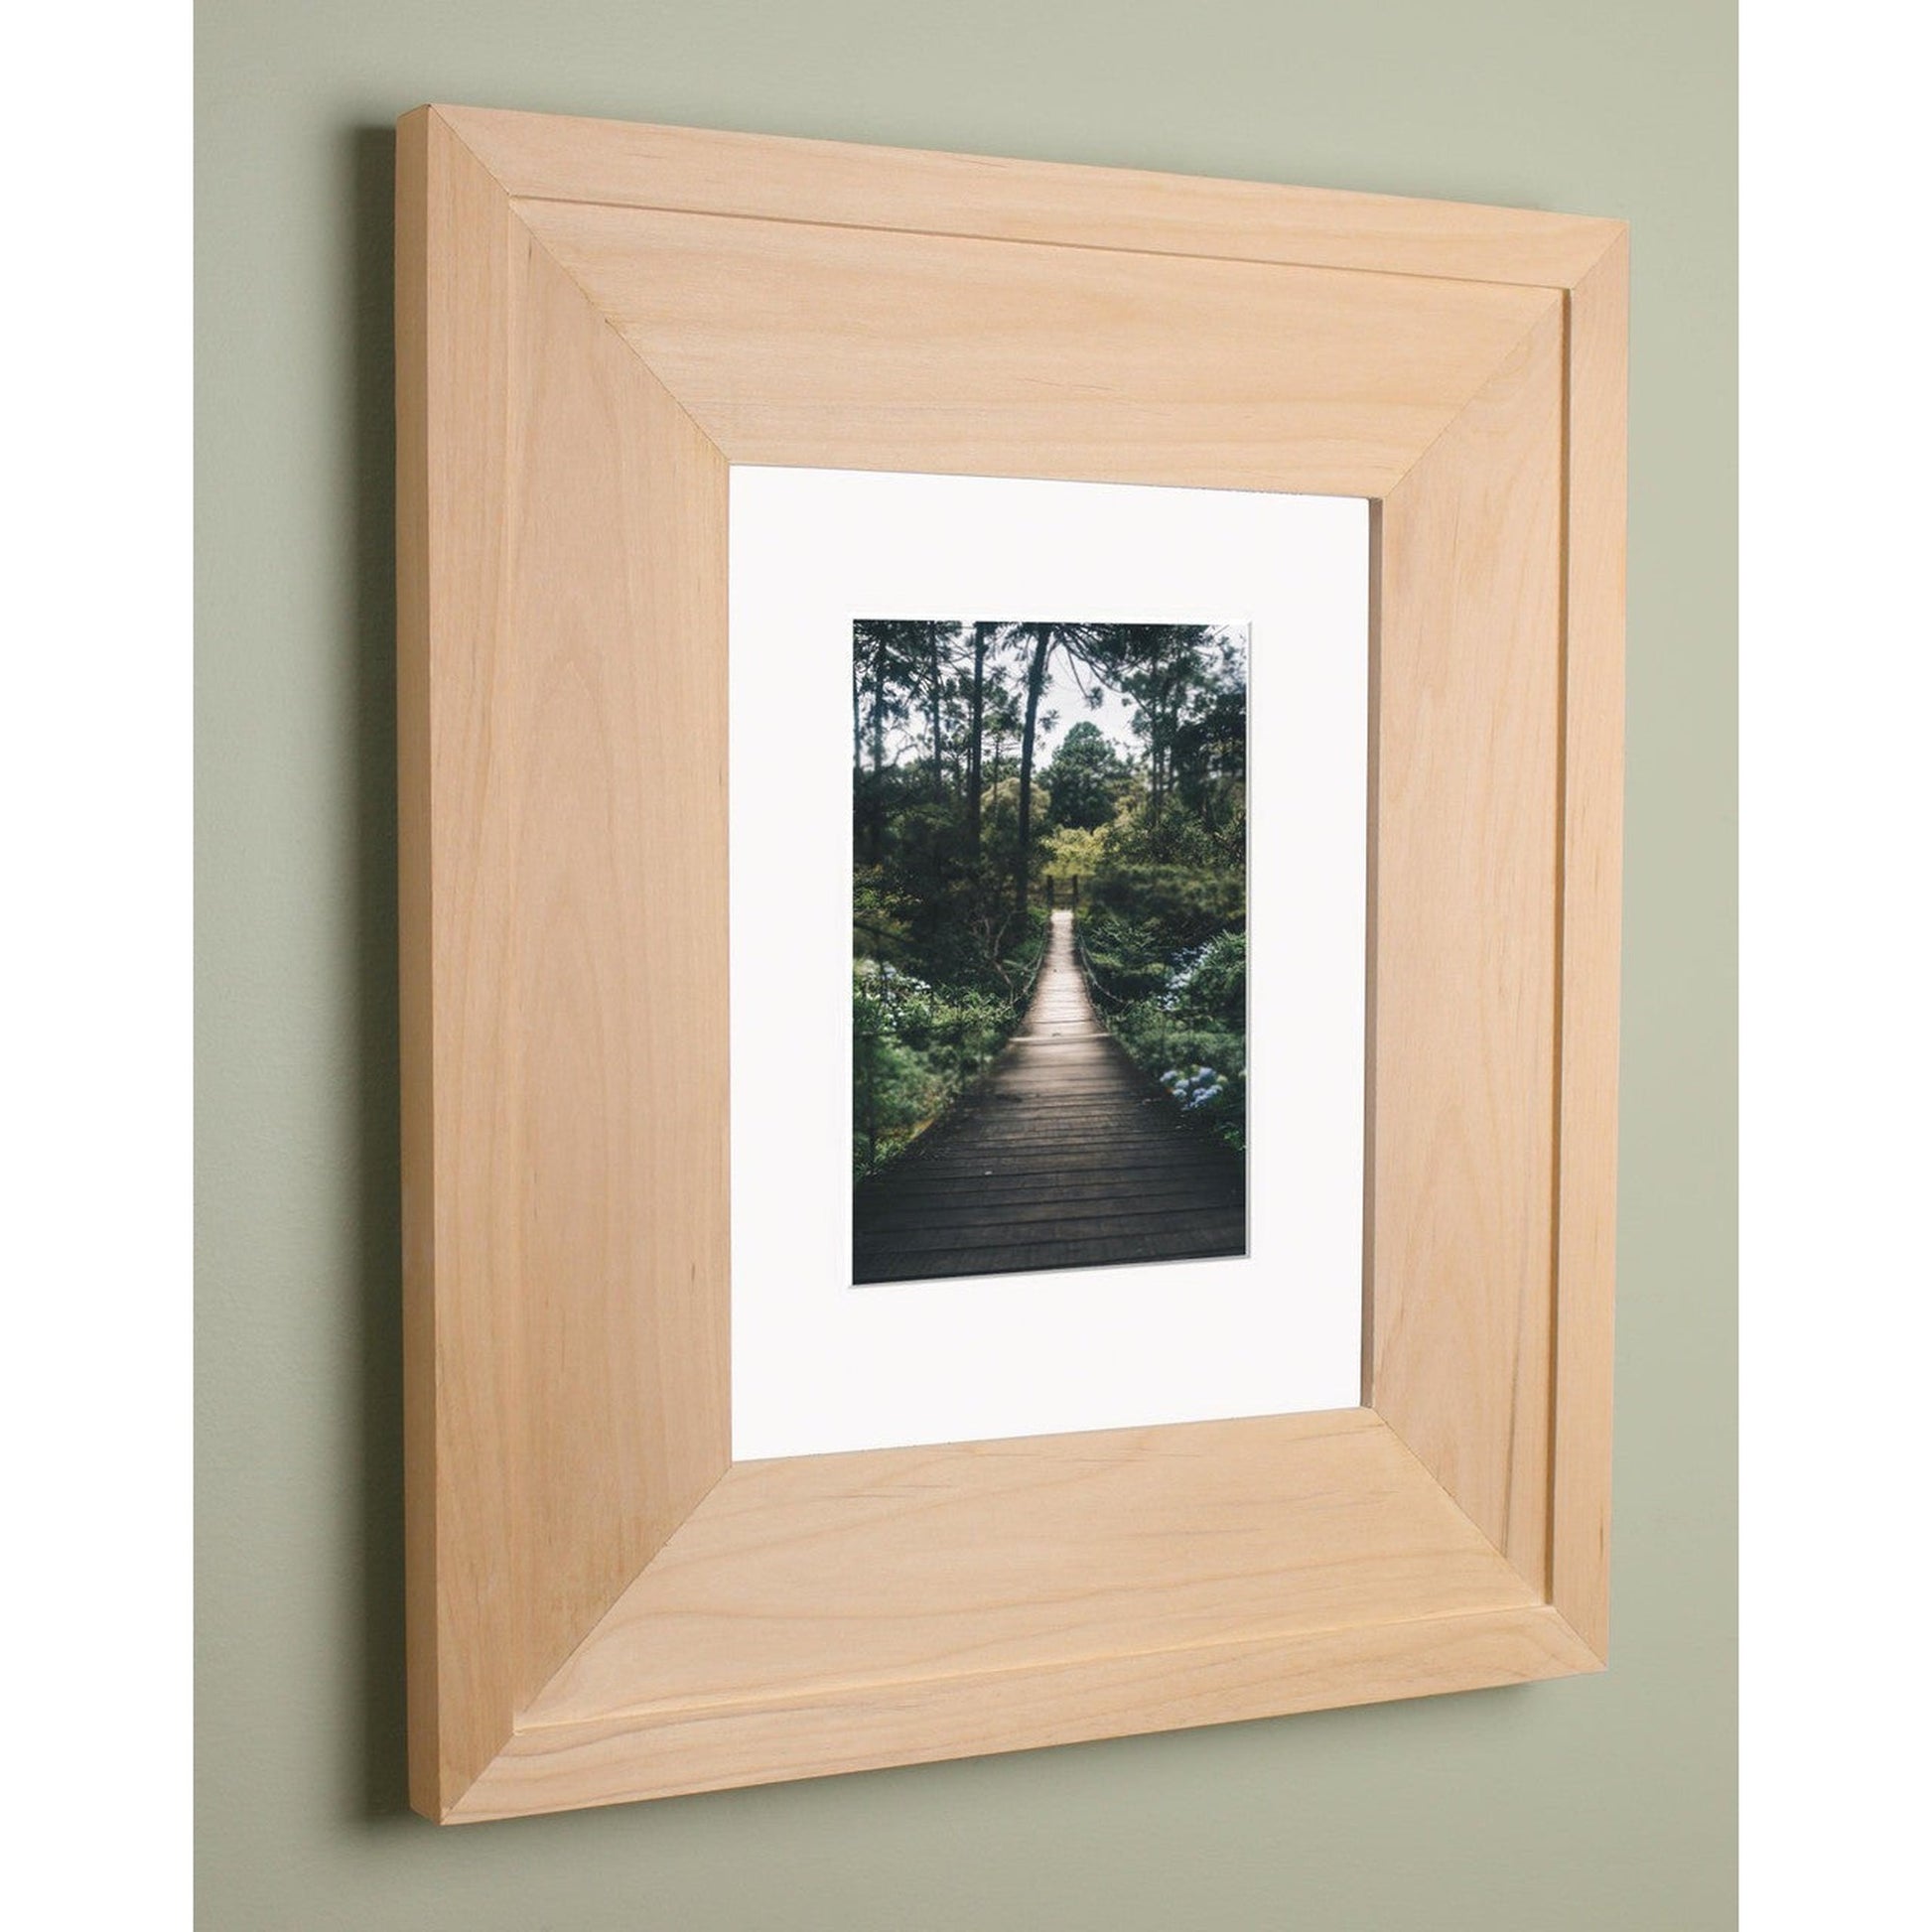 Fox Hollow Furnishings 11" x 14" Unfinished Raised Edge Compact Portrait Standard 4" Depth Recessed Picture Frame Medicine Cabinet With Ivory Matting